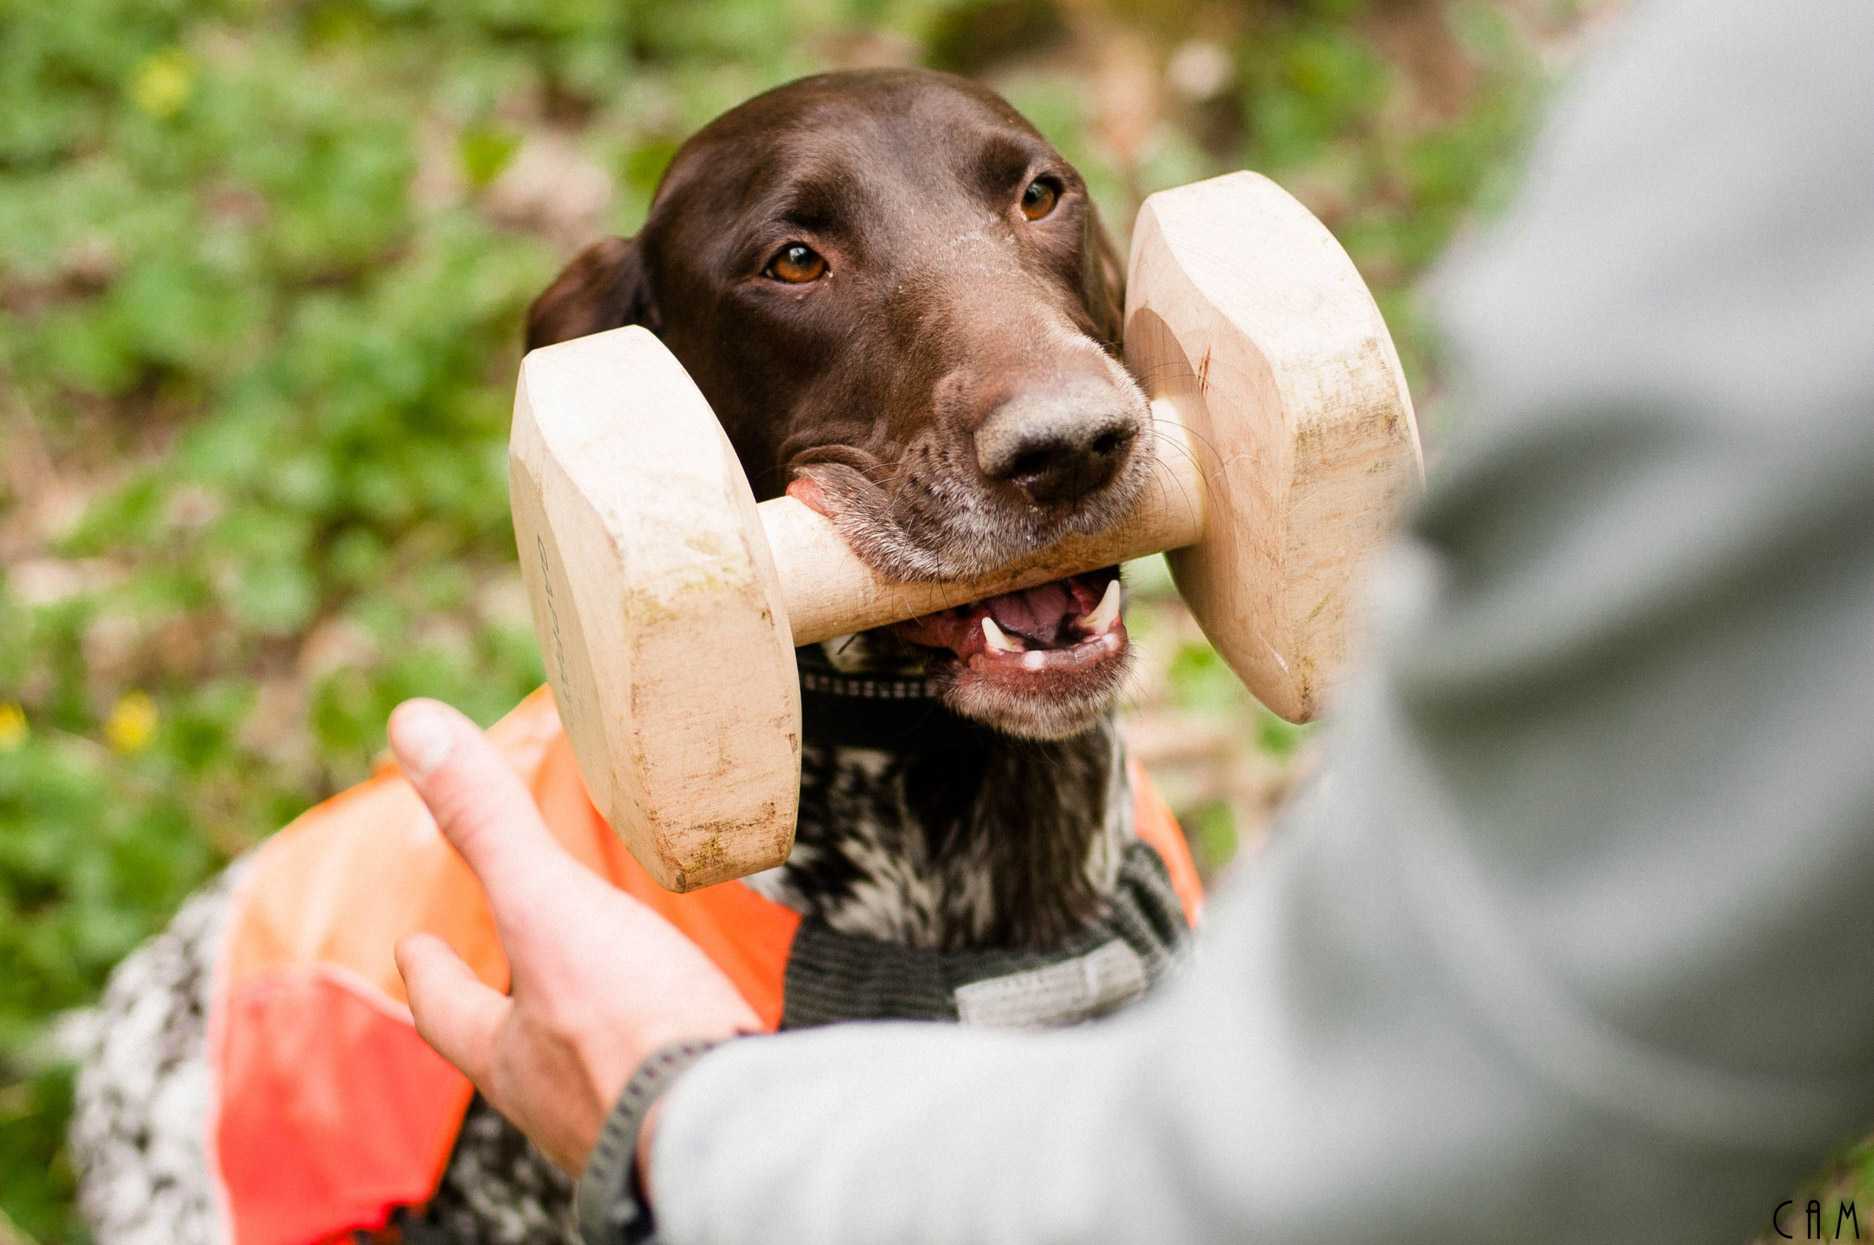 Hunting with dogs: Discipline, obedience and teamwork